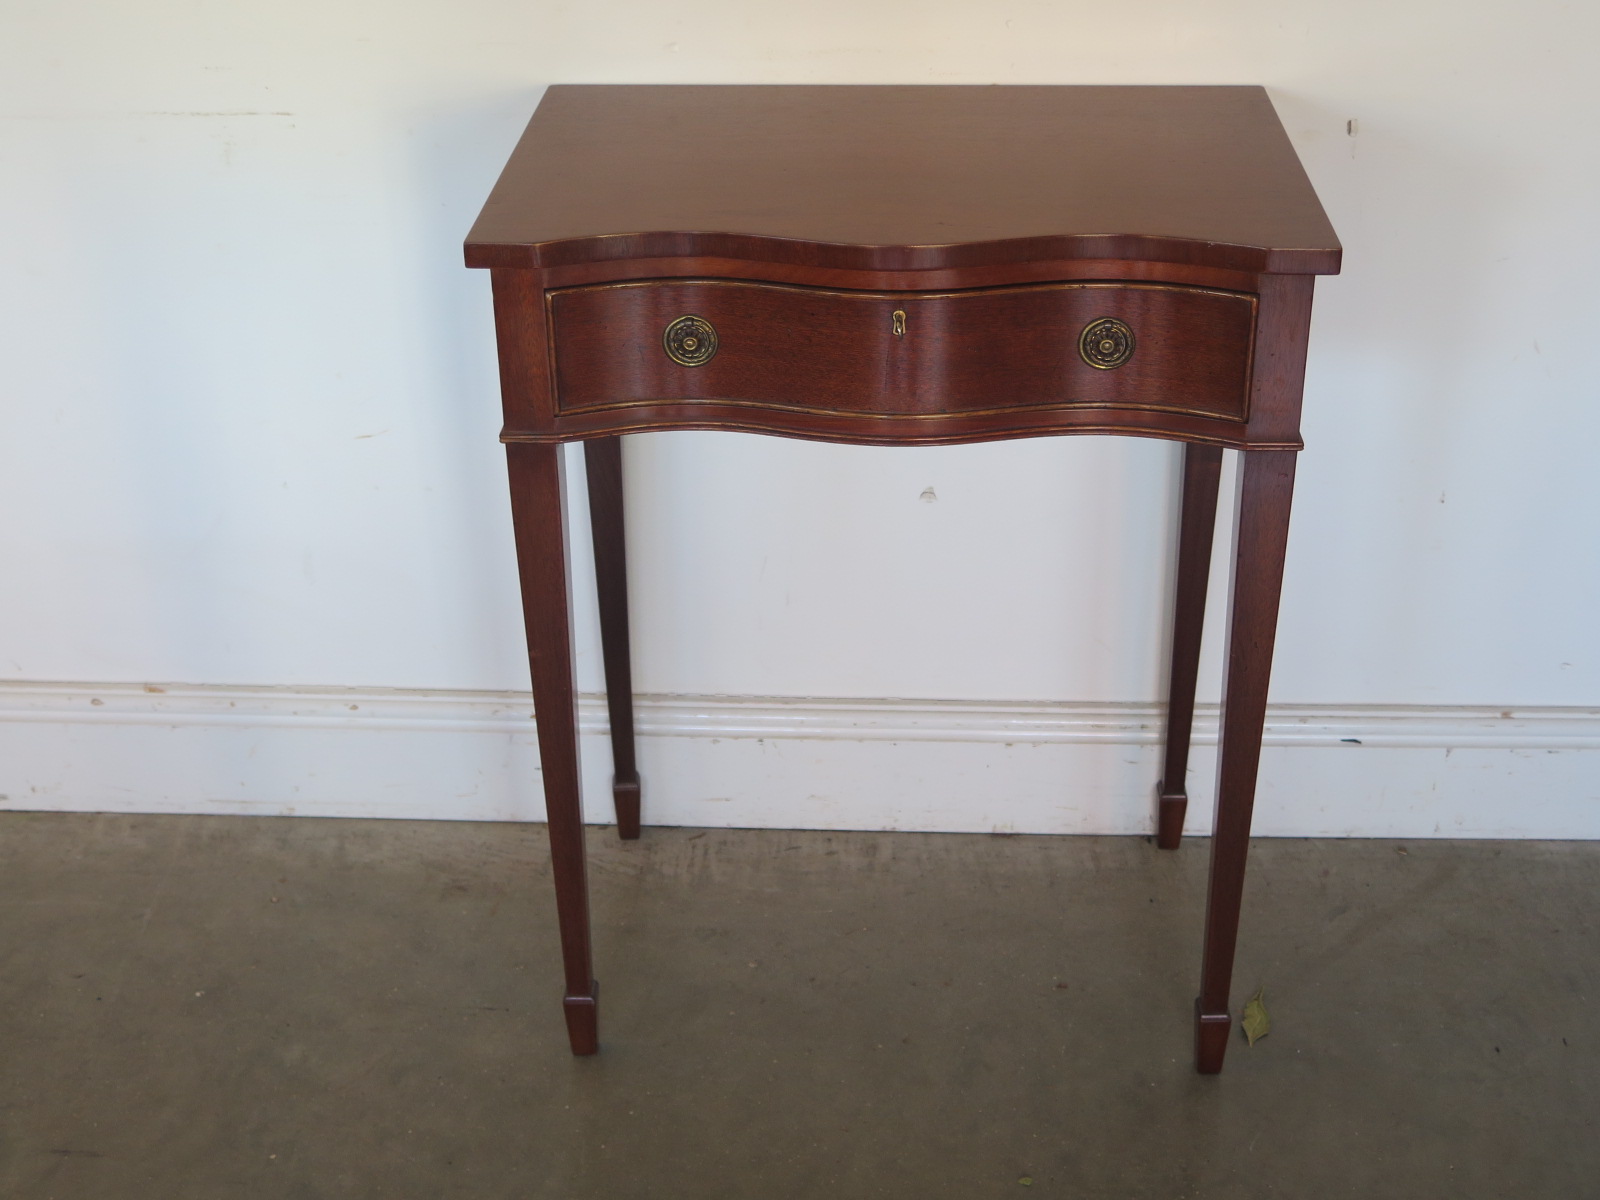 A modern side table with a serpentine front - Width 61cm x Height 77cm - in good condition